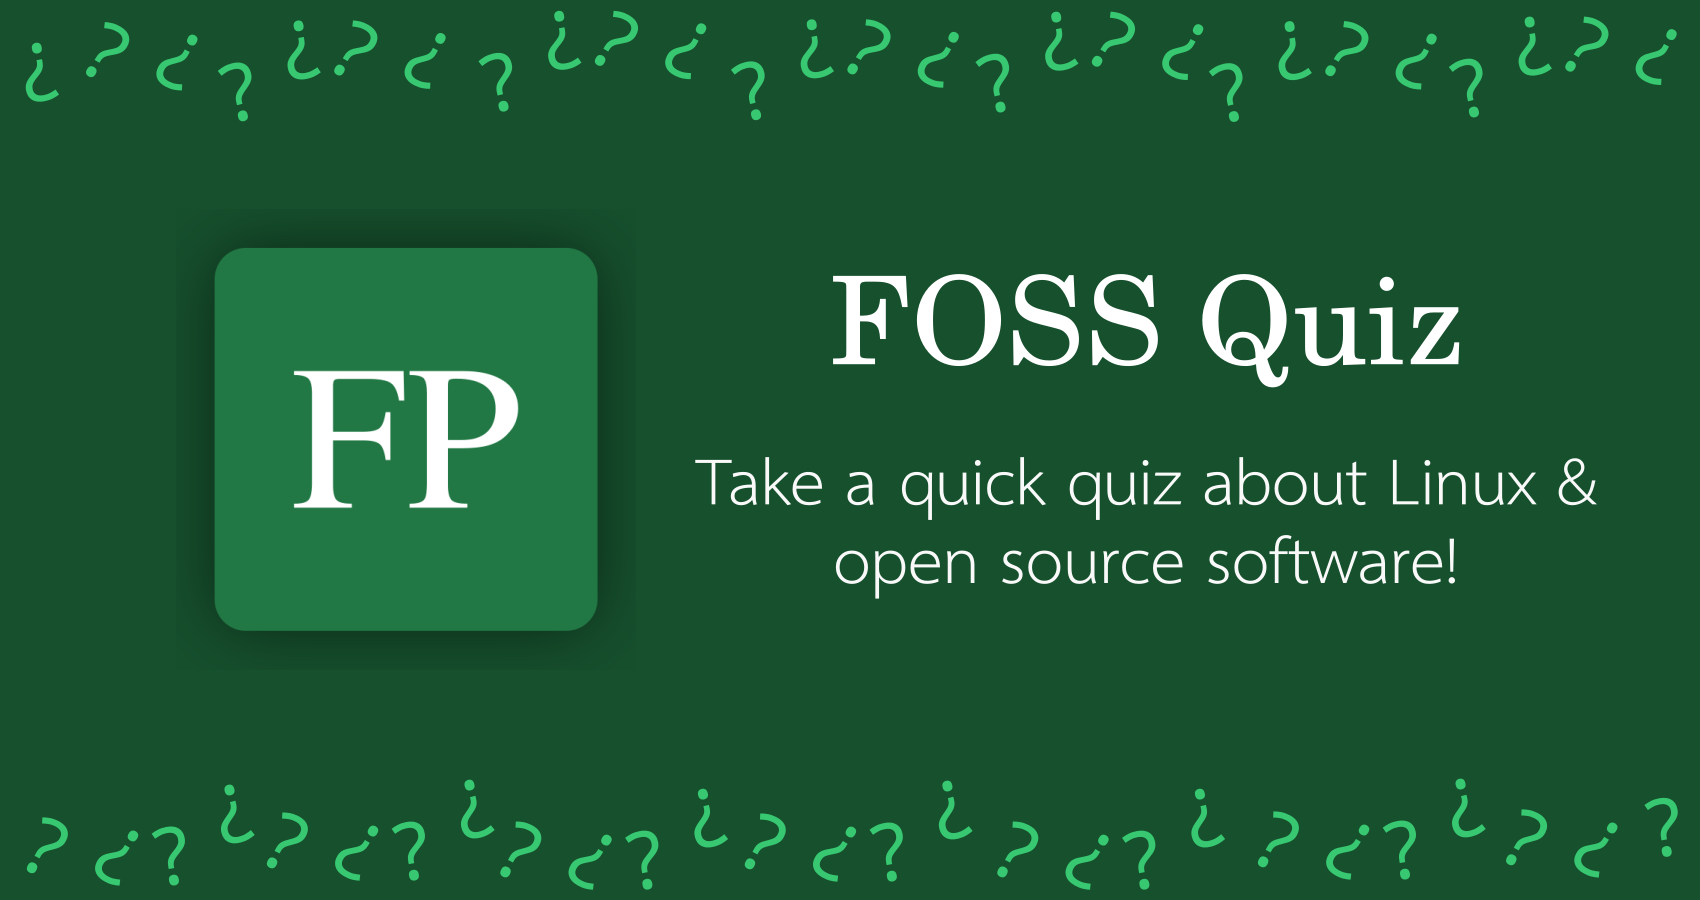 FOSS Quiz: Take a quiz about Linux and open source